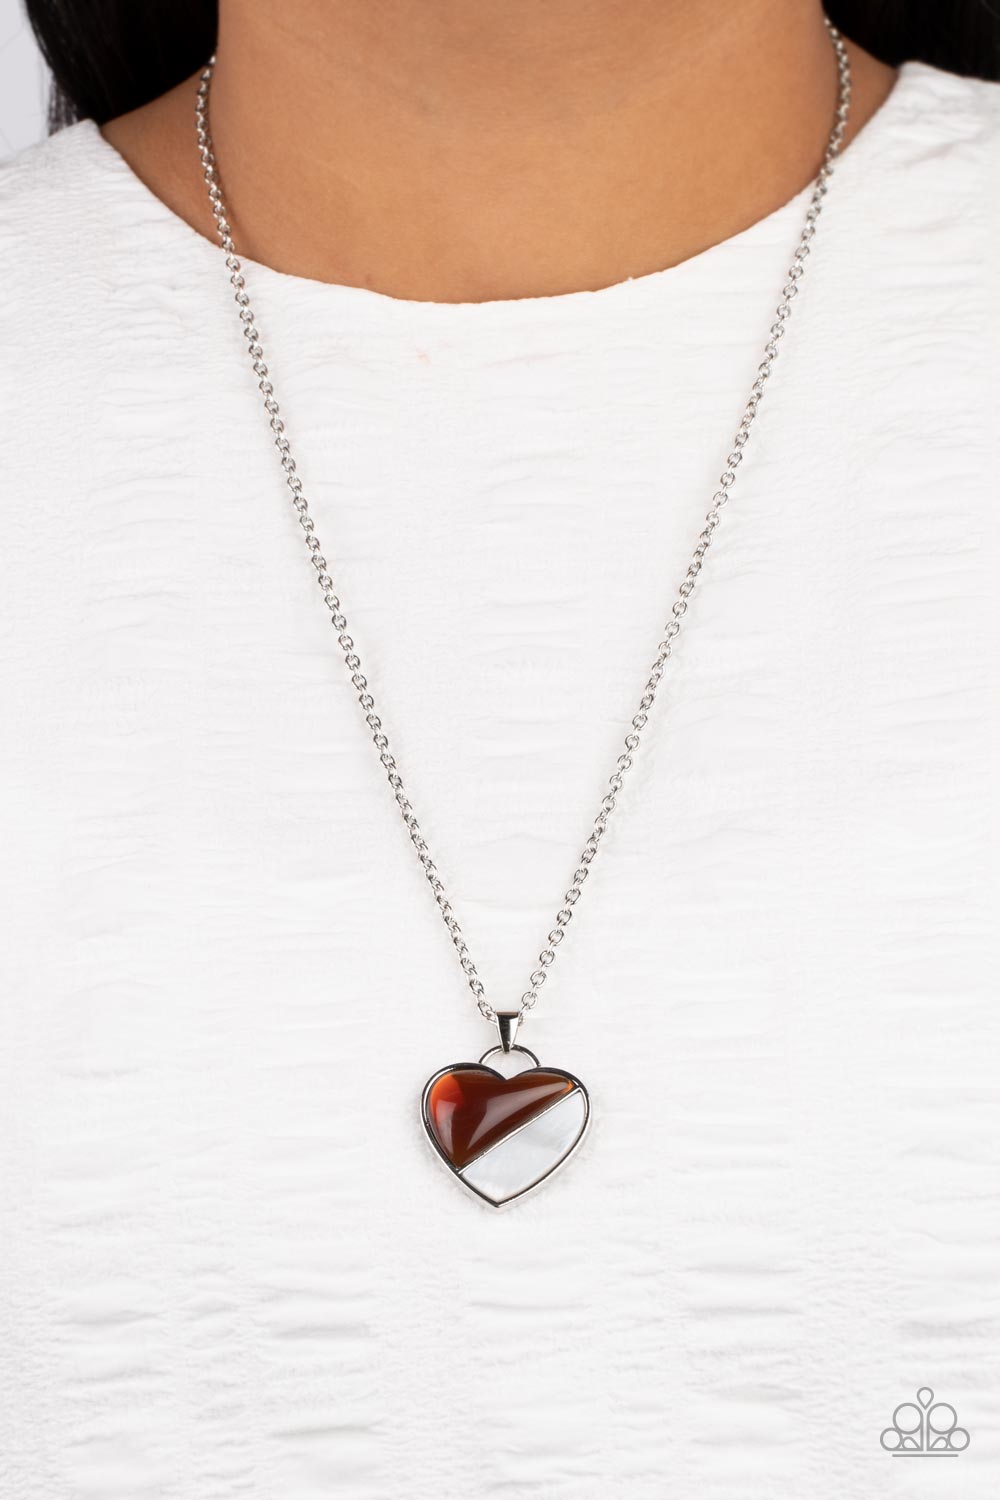 Nautical Romance Brown Heart Necklace - Paparazzi Accessories-on model - CarasShop.com - $5 Jewelry by Cara Jewels